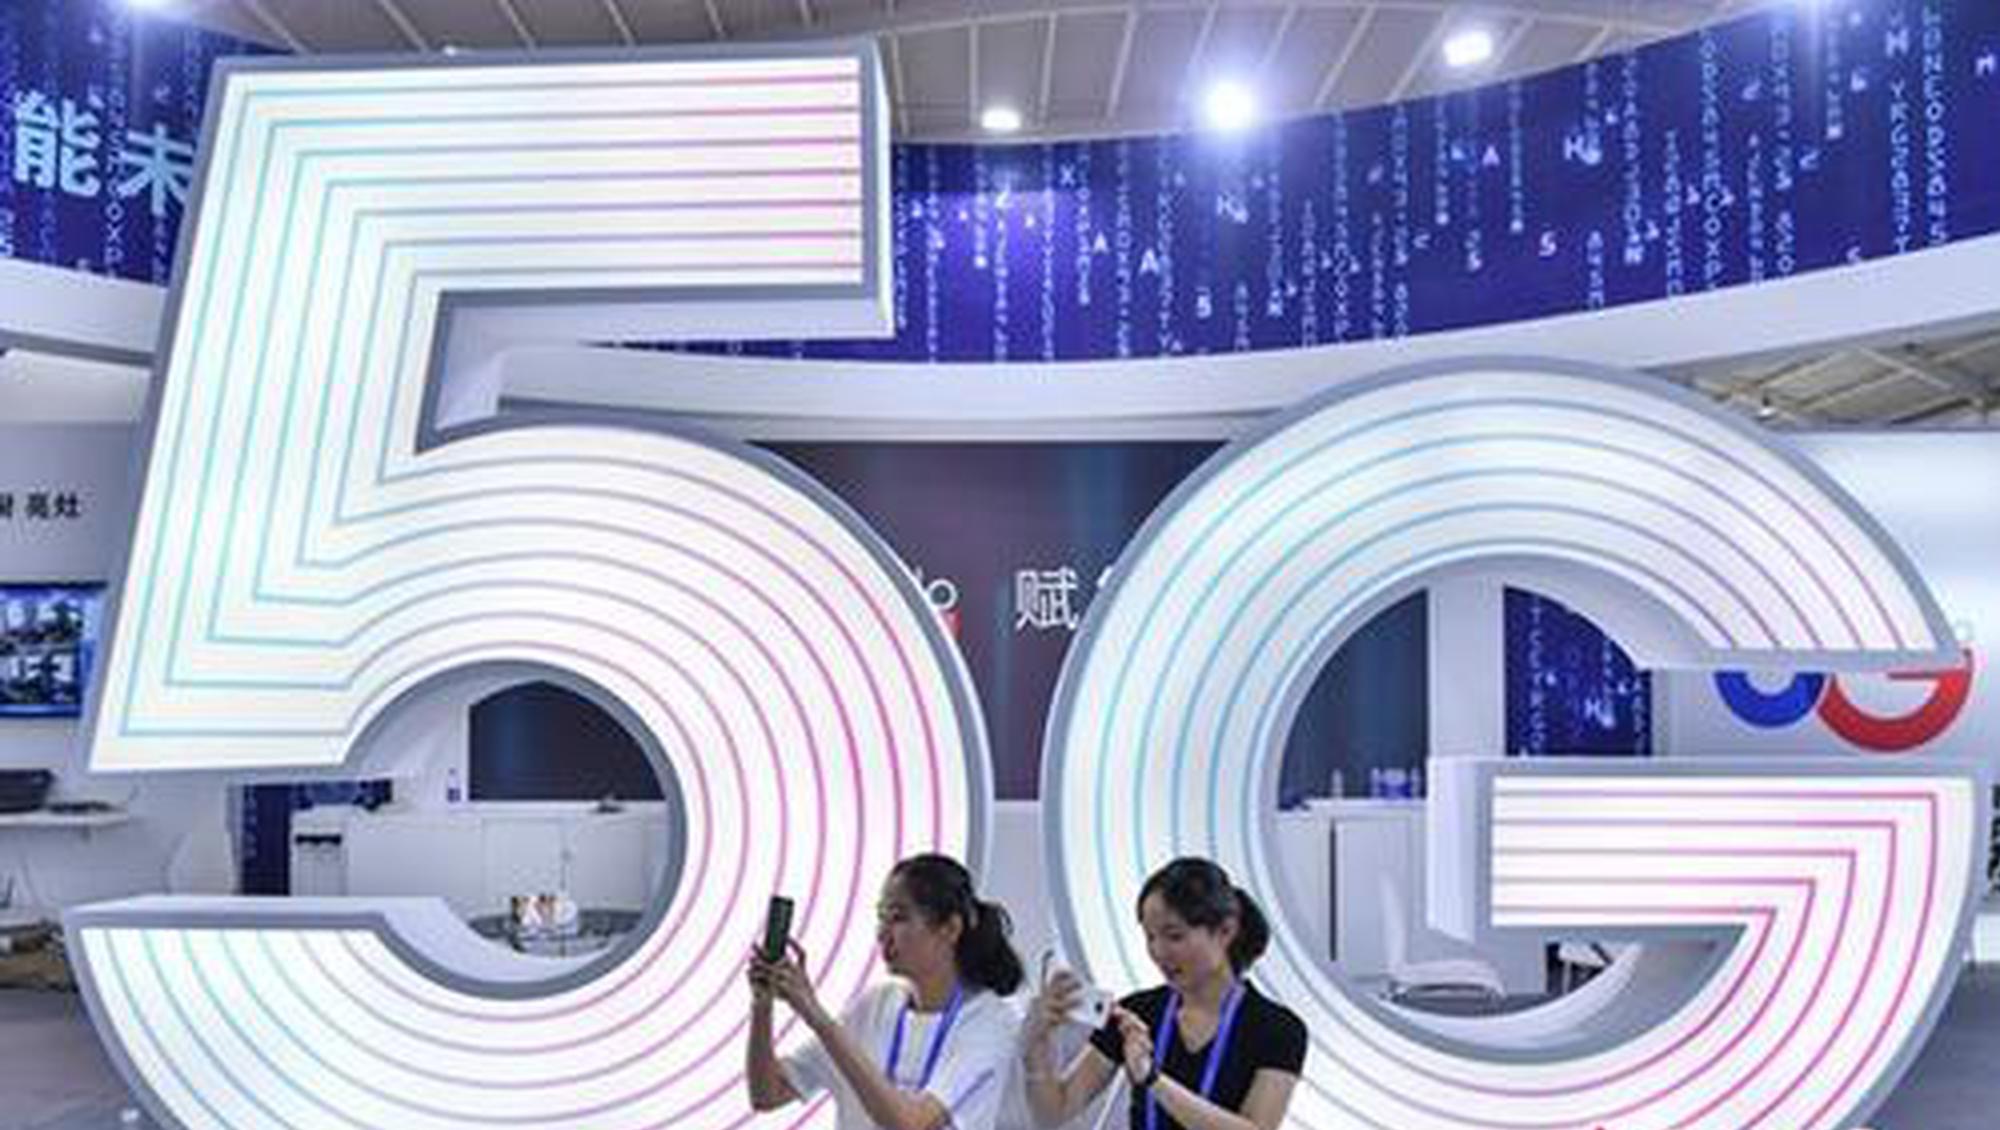 Beijing has over 56,000 5G base stations